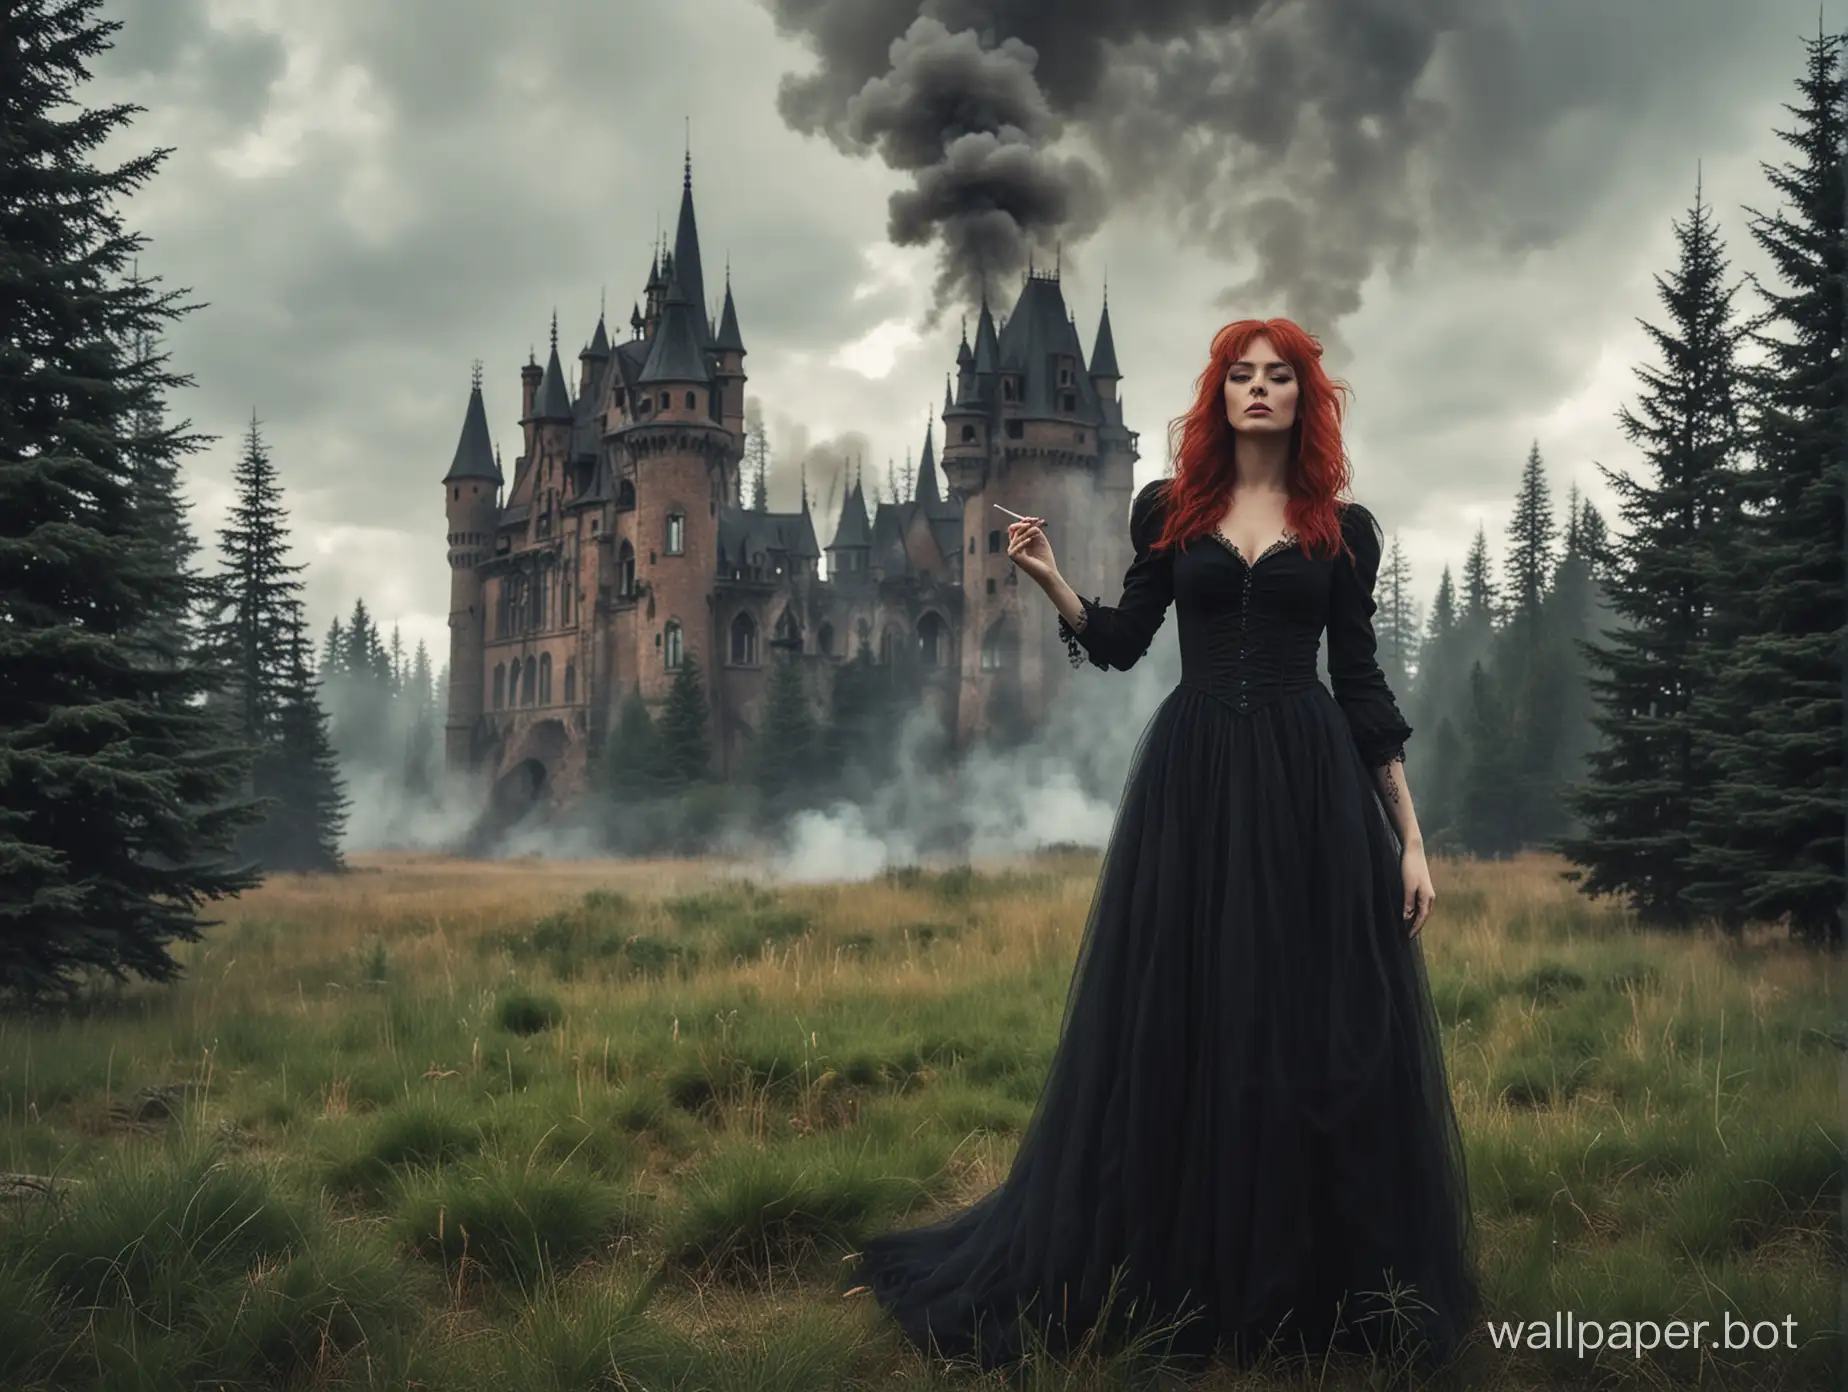 The dark witch stands close to the old dark abandoned castle, surrounded by many fluffy fir trees and a lot of bright green grass, with a cigarette in her hand, in a black dress with red hair smoke around her